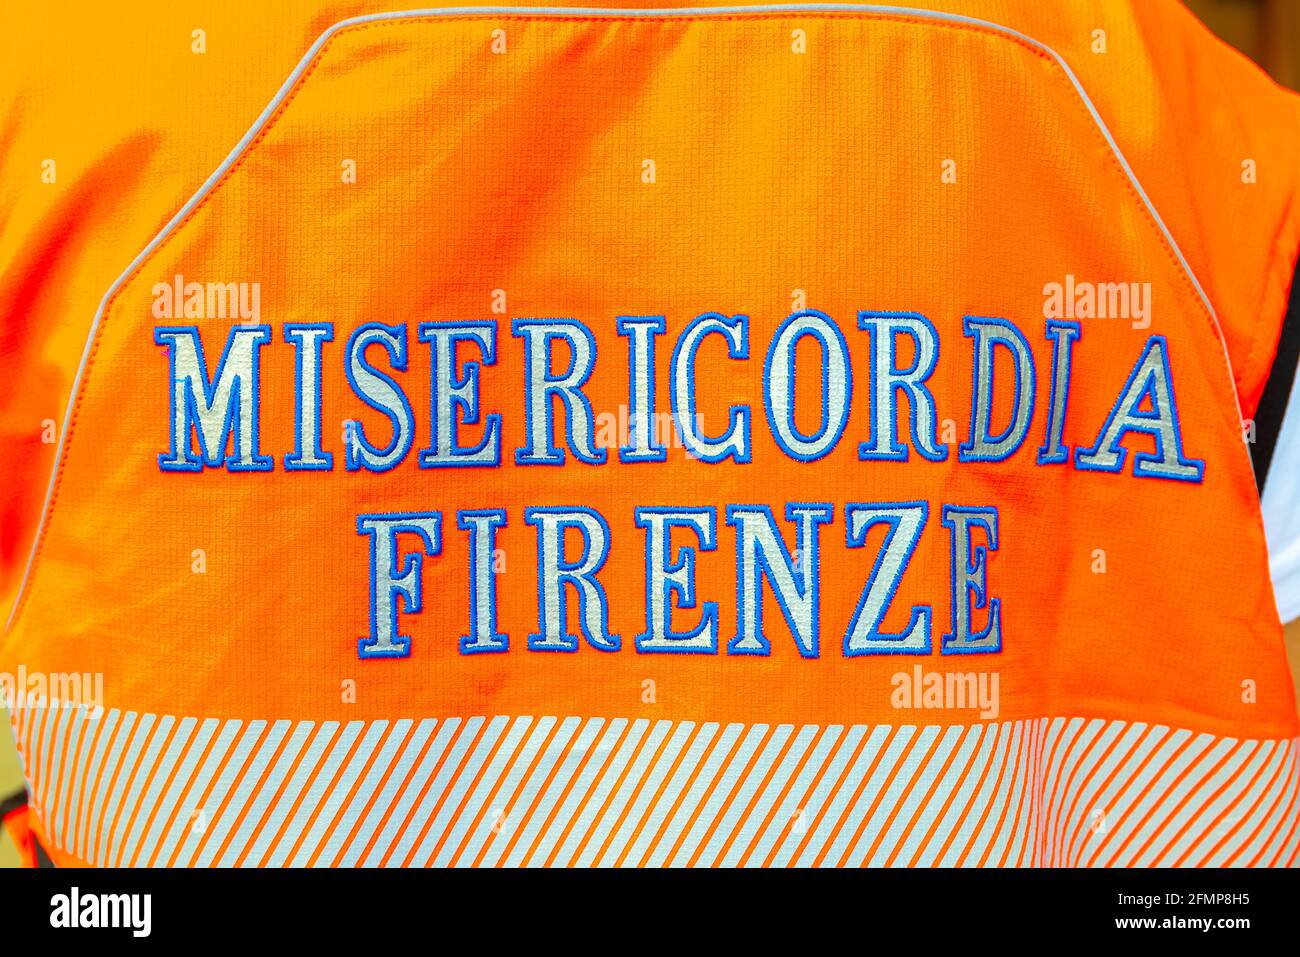 FLORENCE, ITALY - Aug 24, 2020: Florence, Toscana/Italy - 24.08.2020: Protective vest from Misericordia Firenze, a protection organization to help peo Stock Photo